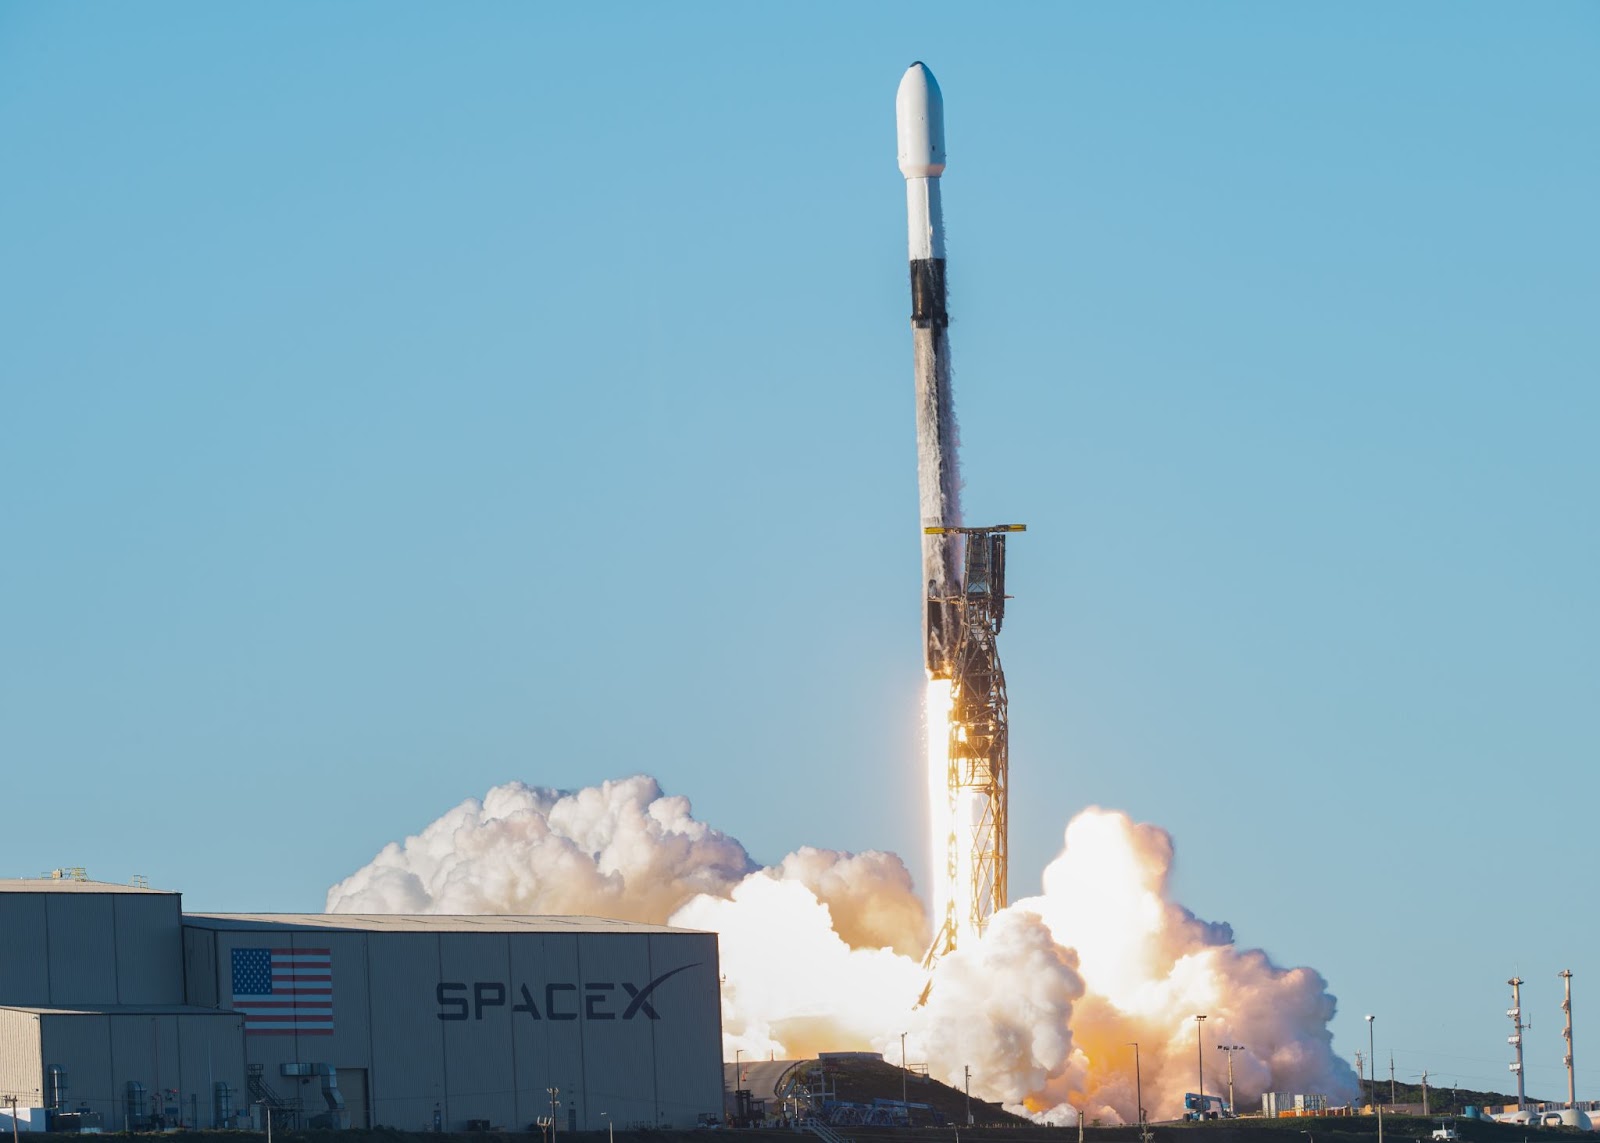 A SpaceX Falcon 9 rocket launching from a ground facility with significant smoke and flame visible.